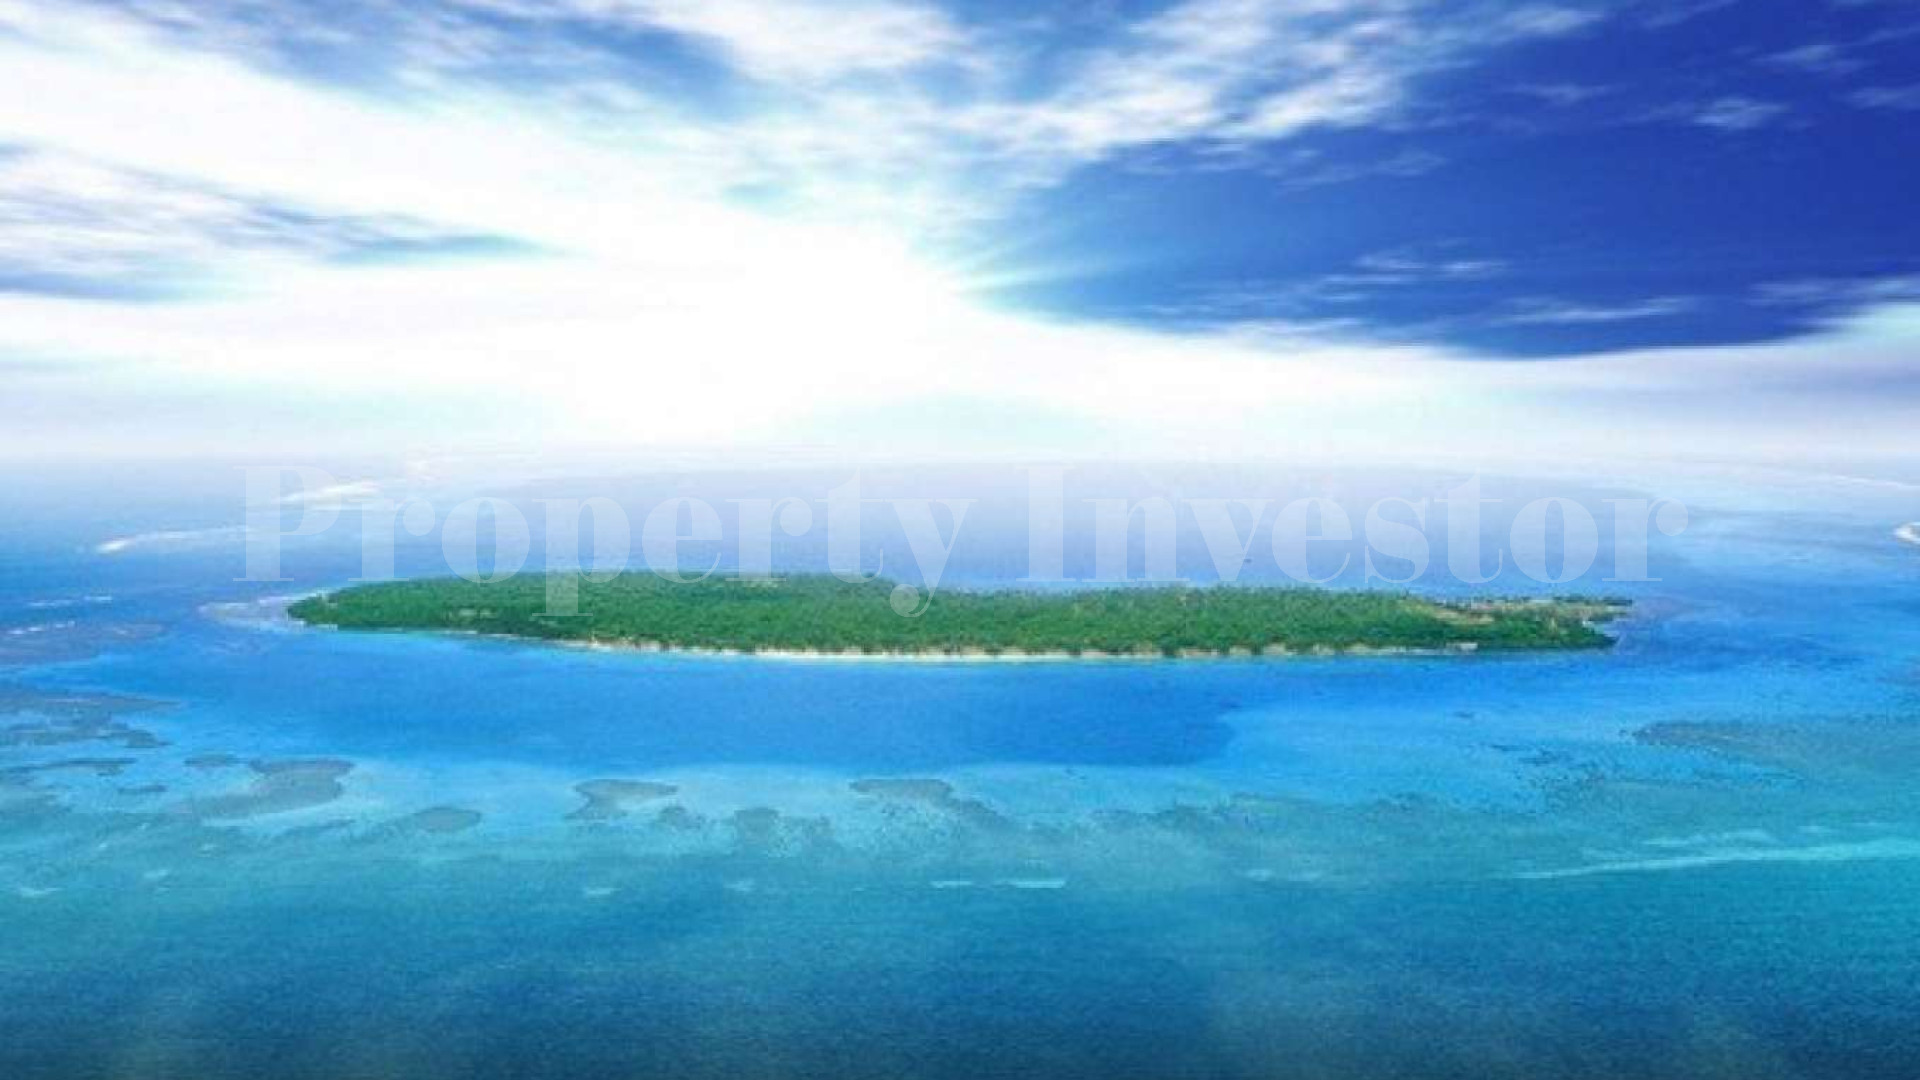 91 Hectare Private Island Resort or Residence with Runway & Golf Course for Sale in Fiji